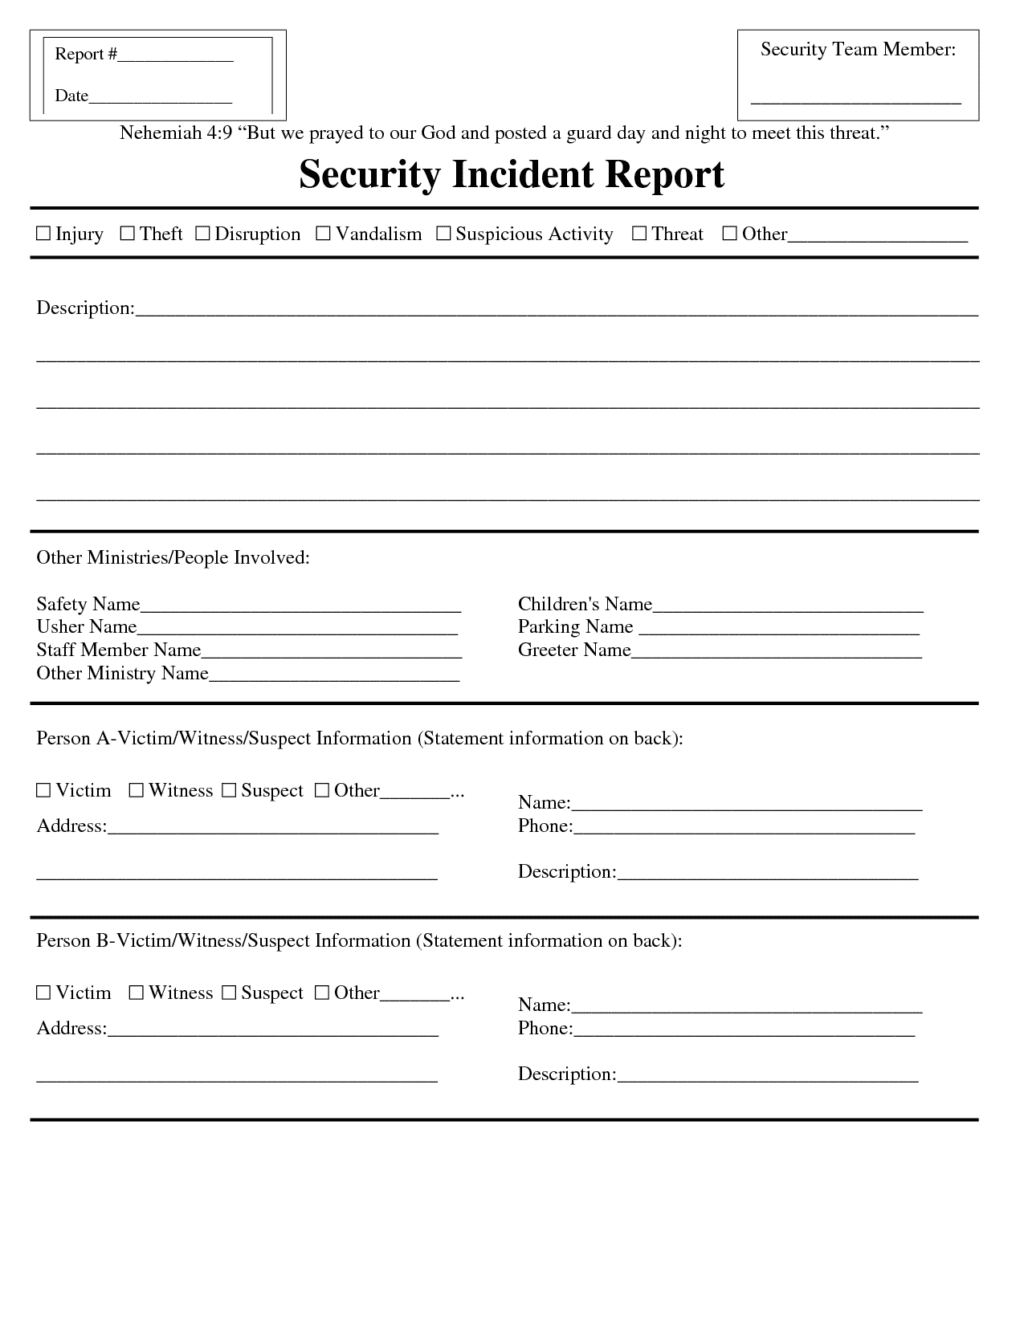 Security Report Example And Security Officer Incident Report Example